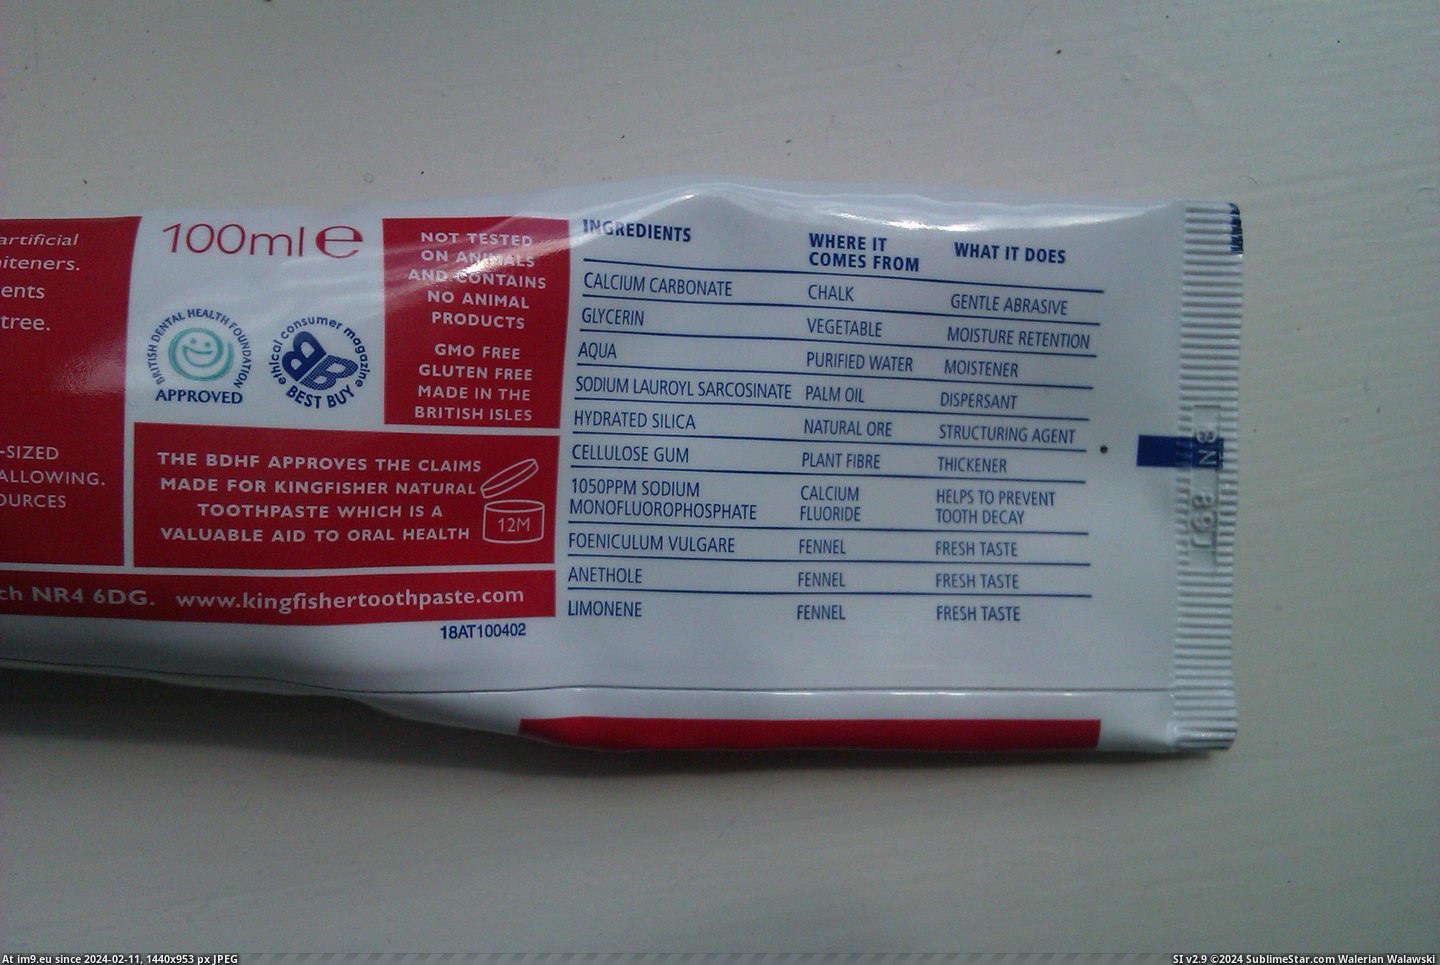 [Mildlyinteresting] The ingredients section on this toothpaste tube explains where each ingredient comes from and what it does (in My r/MILDLYINTERESTING favs)